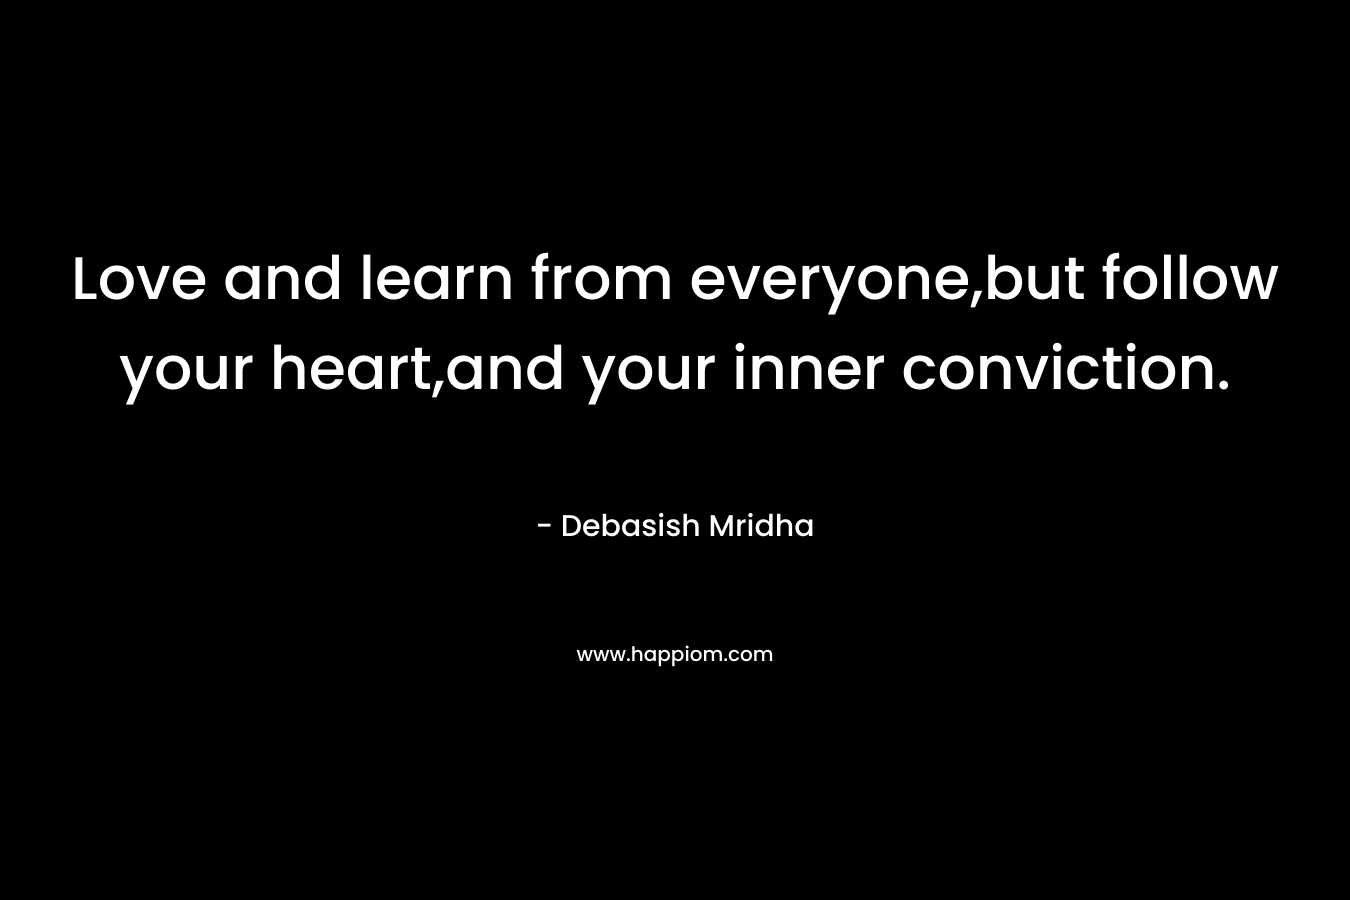 Love and learn from everyone,but follow your heart,and your inner conviction. – Debasish Mridha